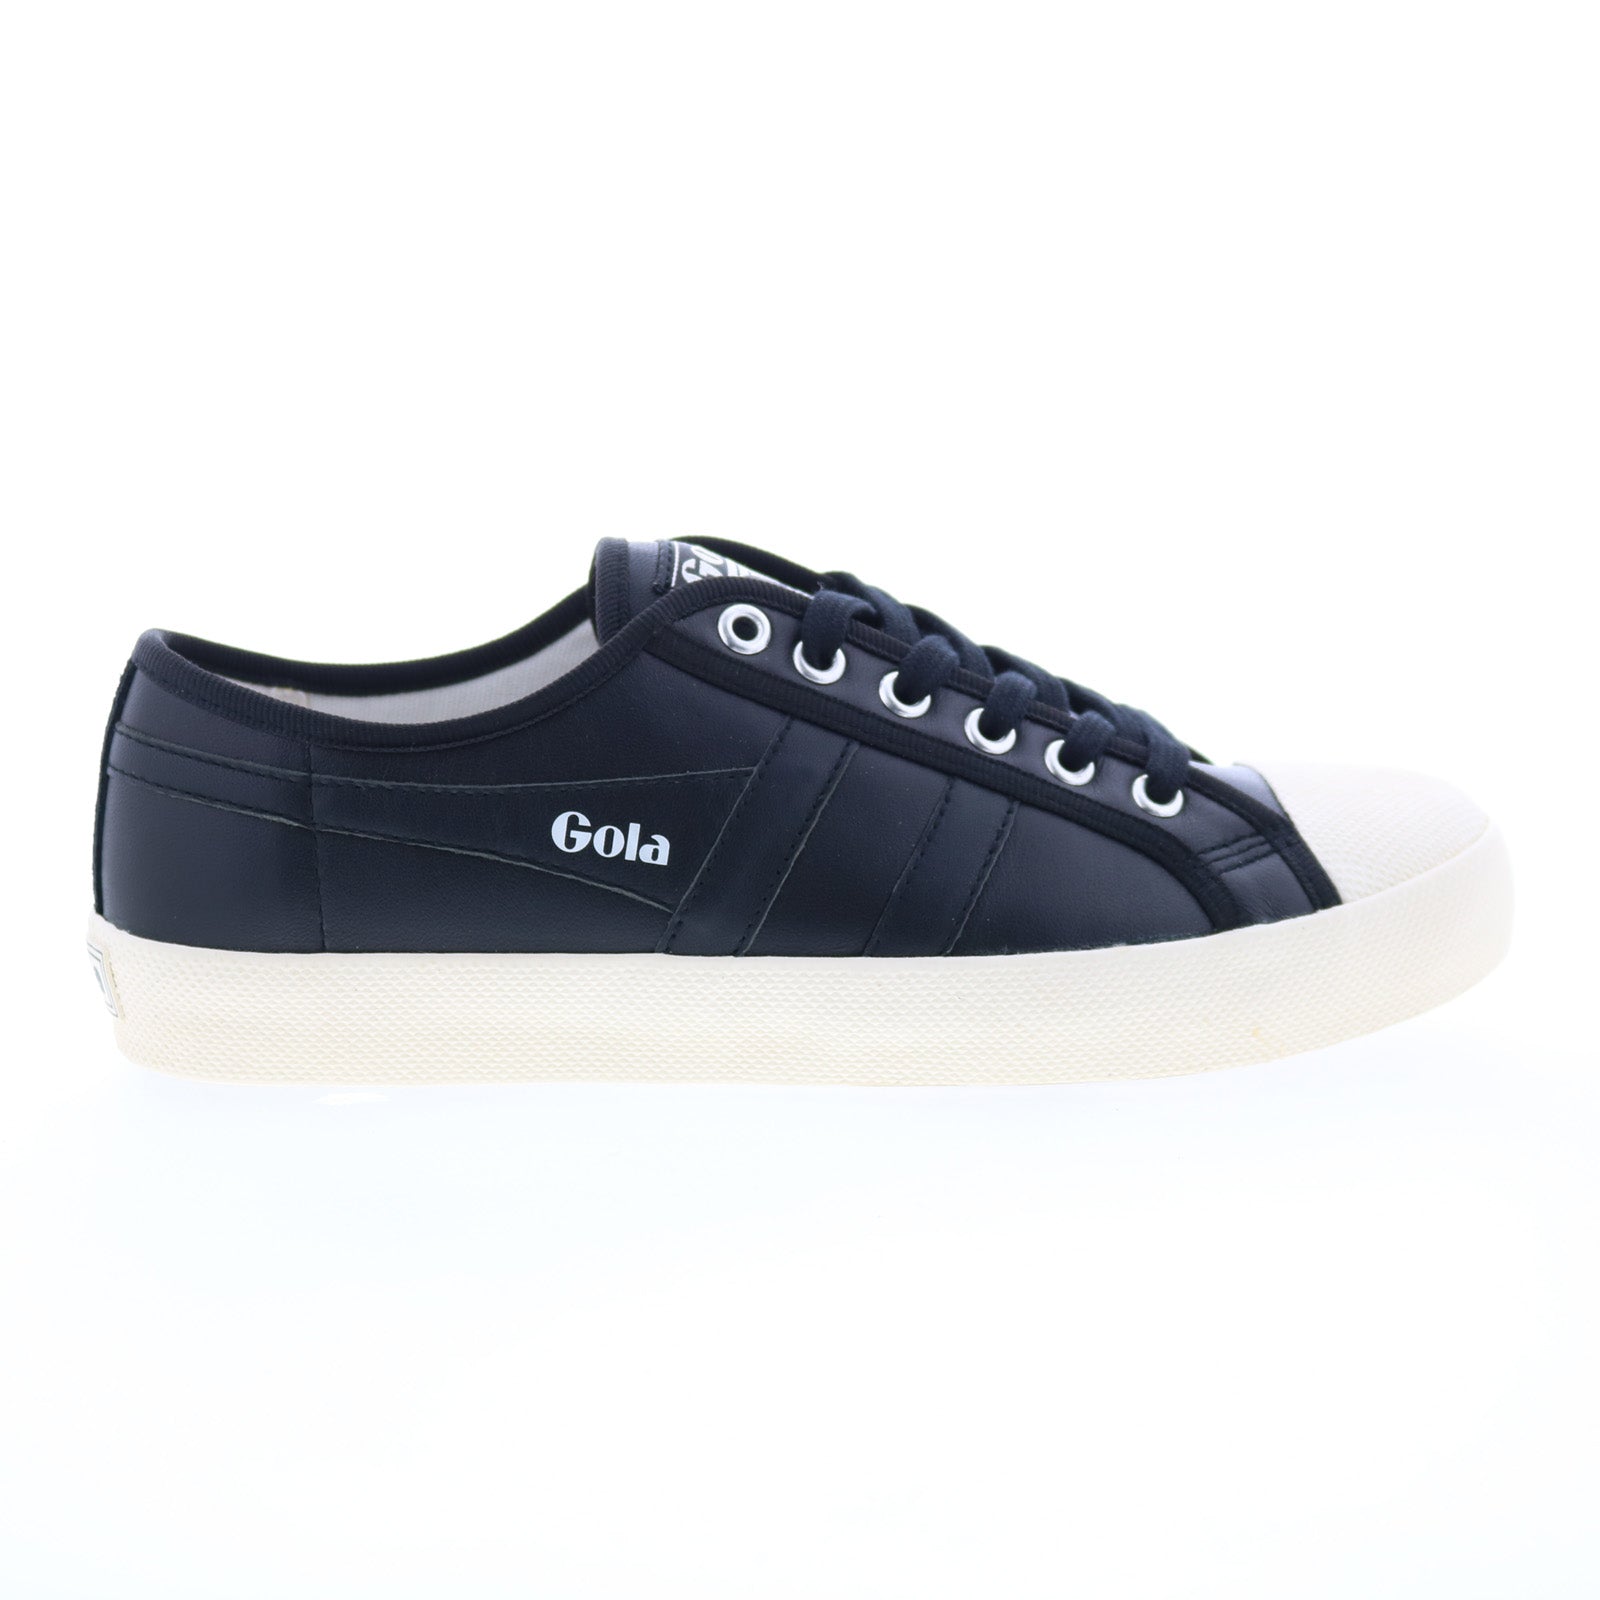 Gola Coaster Leather CLA309 Womens Black Leather Lifestyle Sneakers Shoes